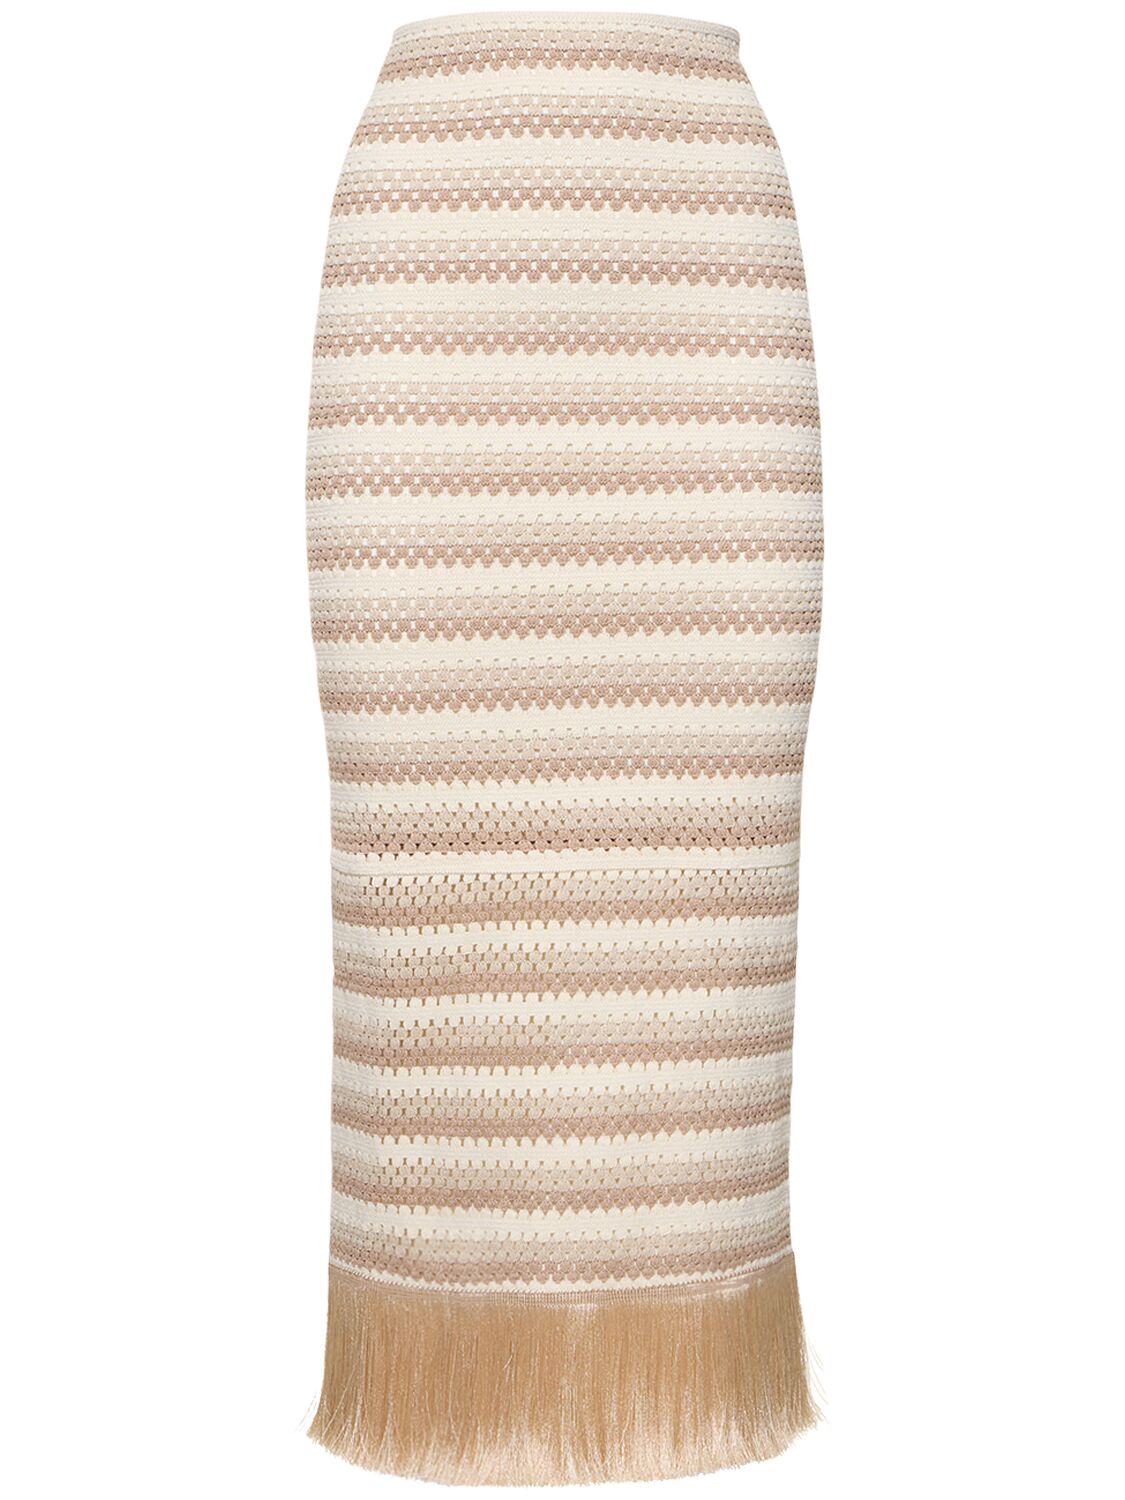 Image of Stretch Tech Crocheted Maxi Skirt